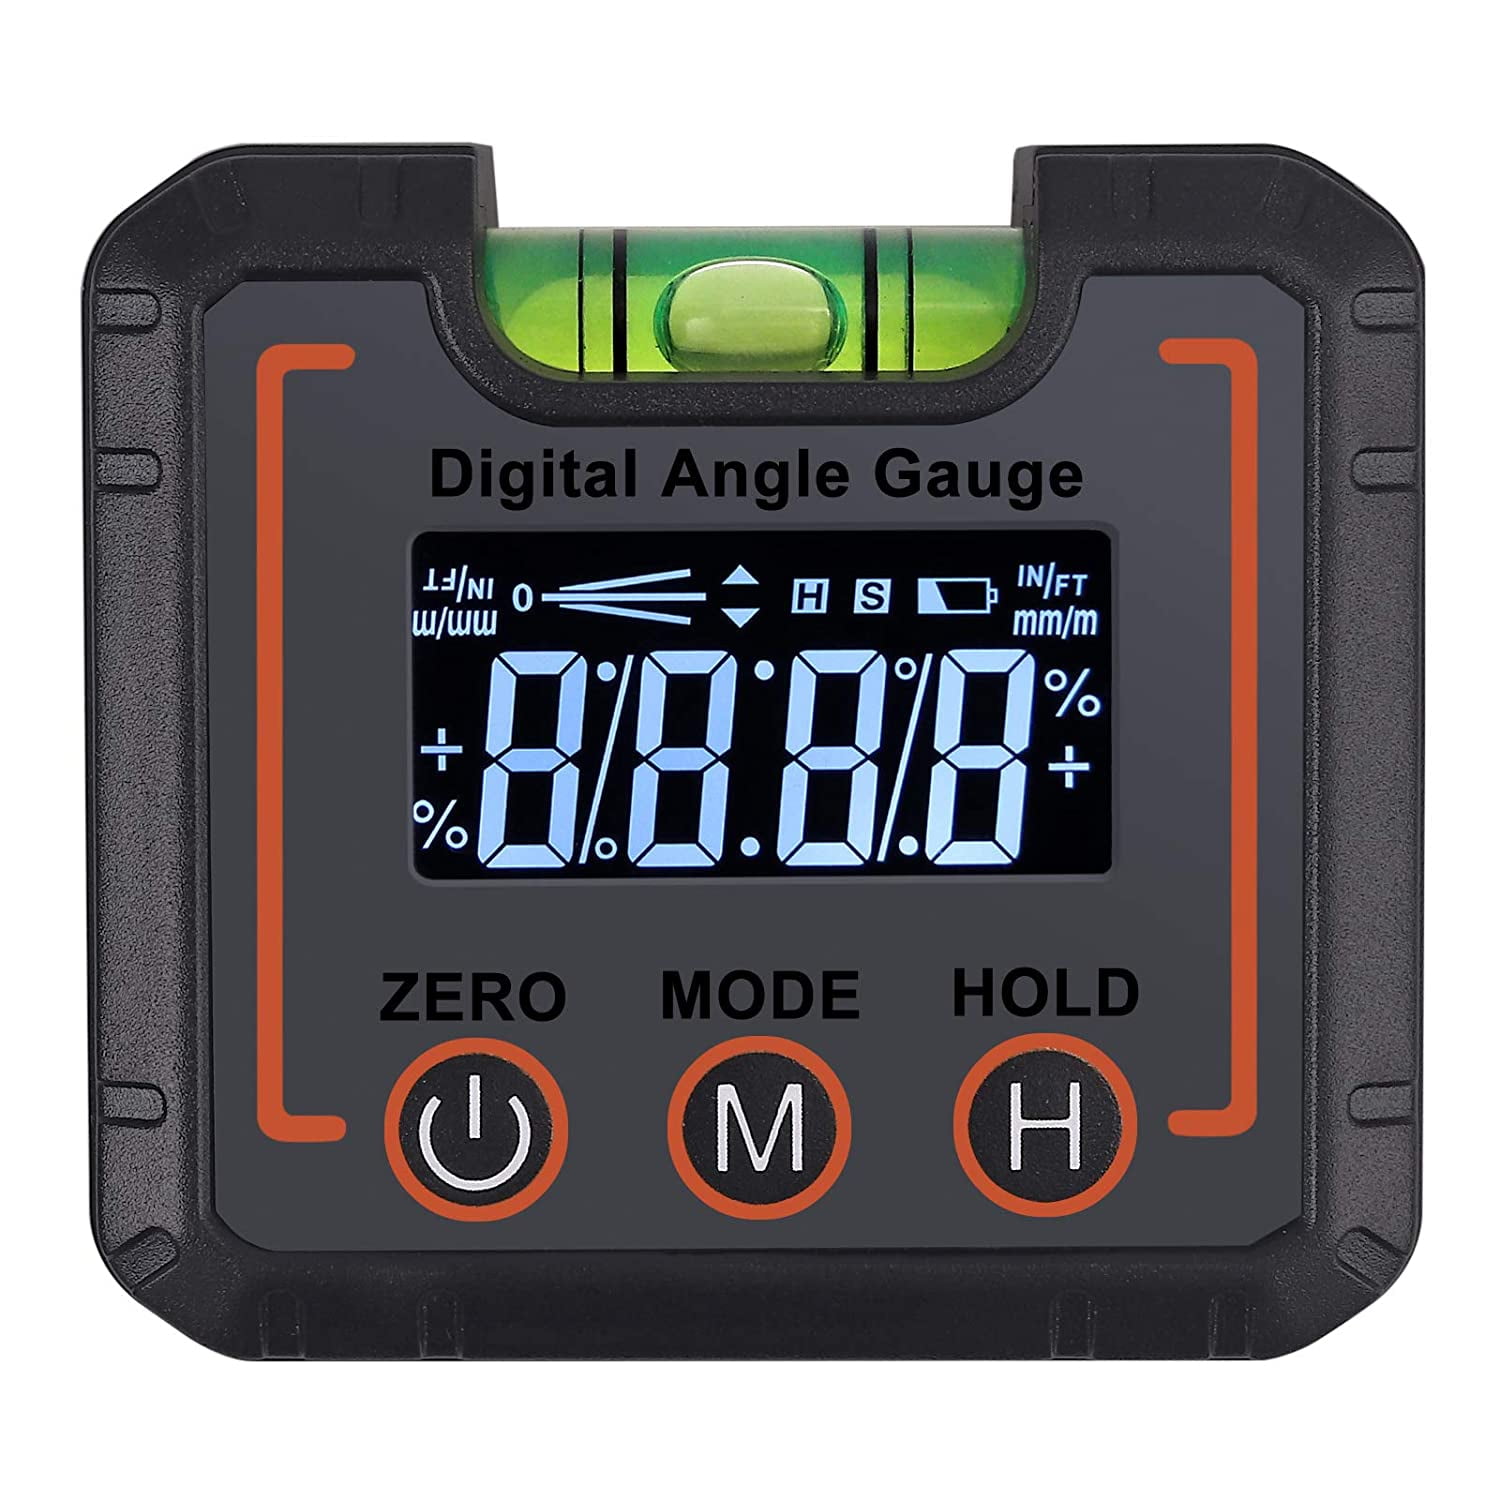 LCD Digital Inclinometer Protractor Angle Finder Bevel Level Box Inclinometer Meter Magnetic with Magnetic Based IN/FT,mm/m 